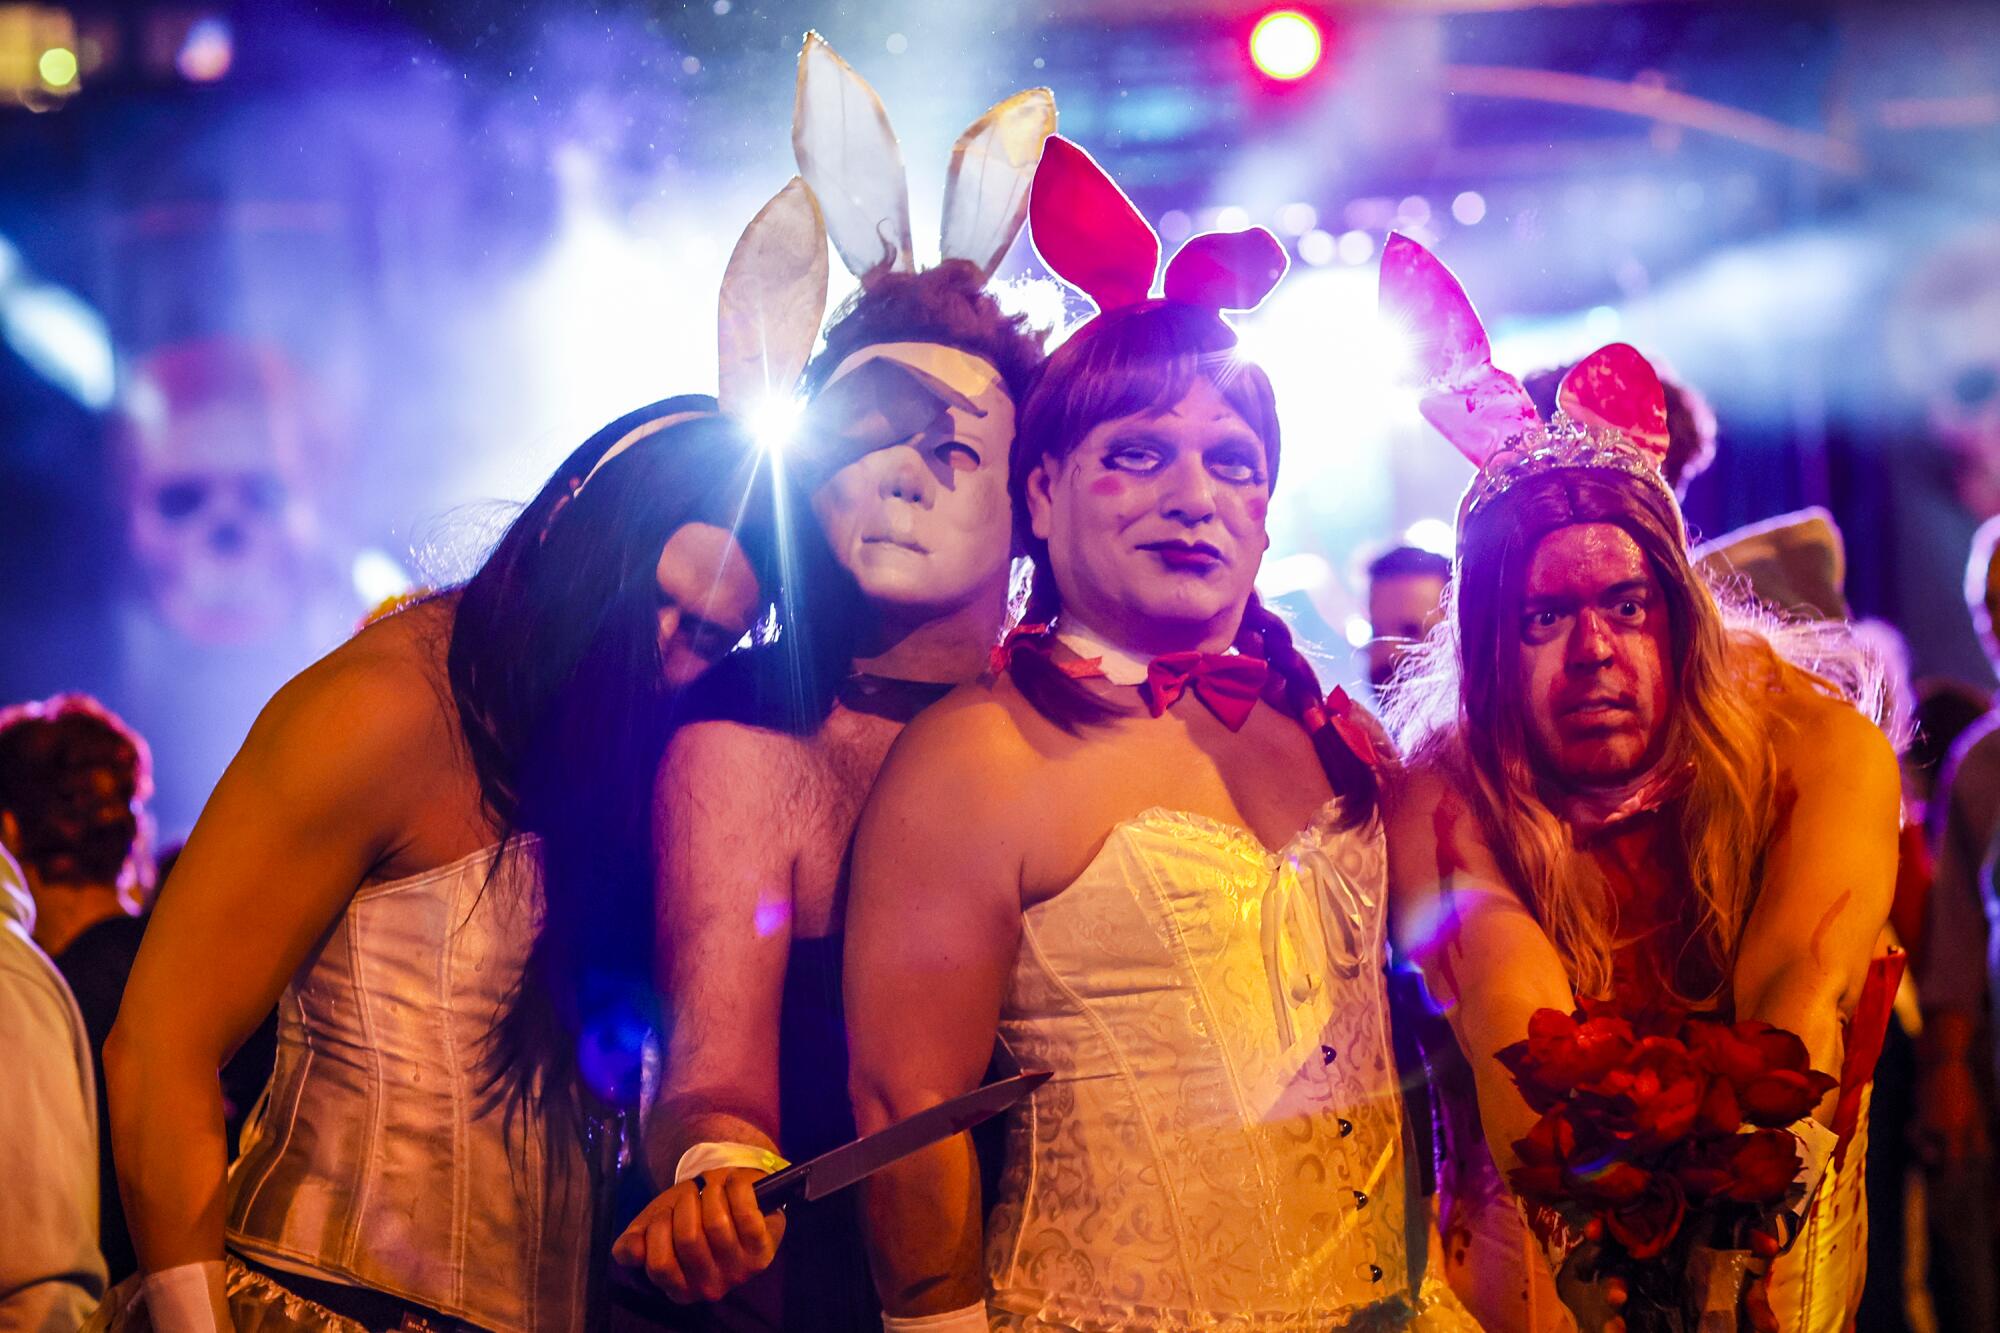 The "Psycho Bunnies" join thousands of revelers at the West Hollywood Halloween Carnaval. 